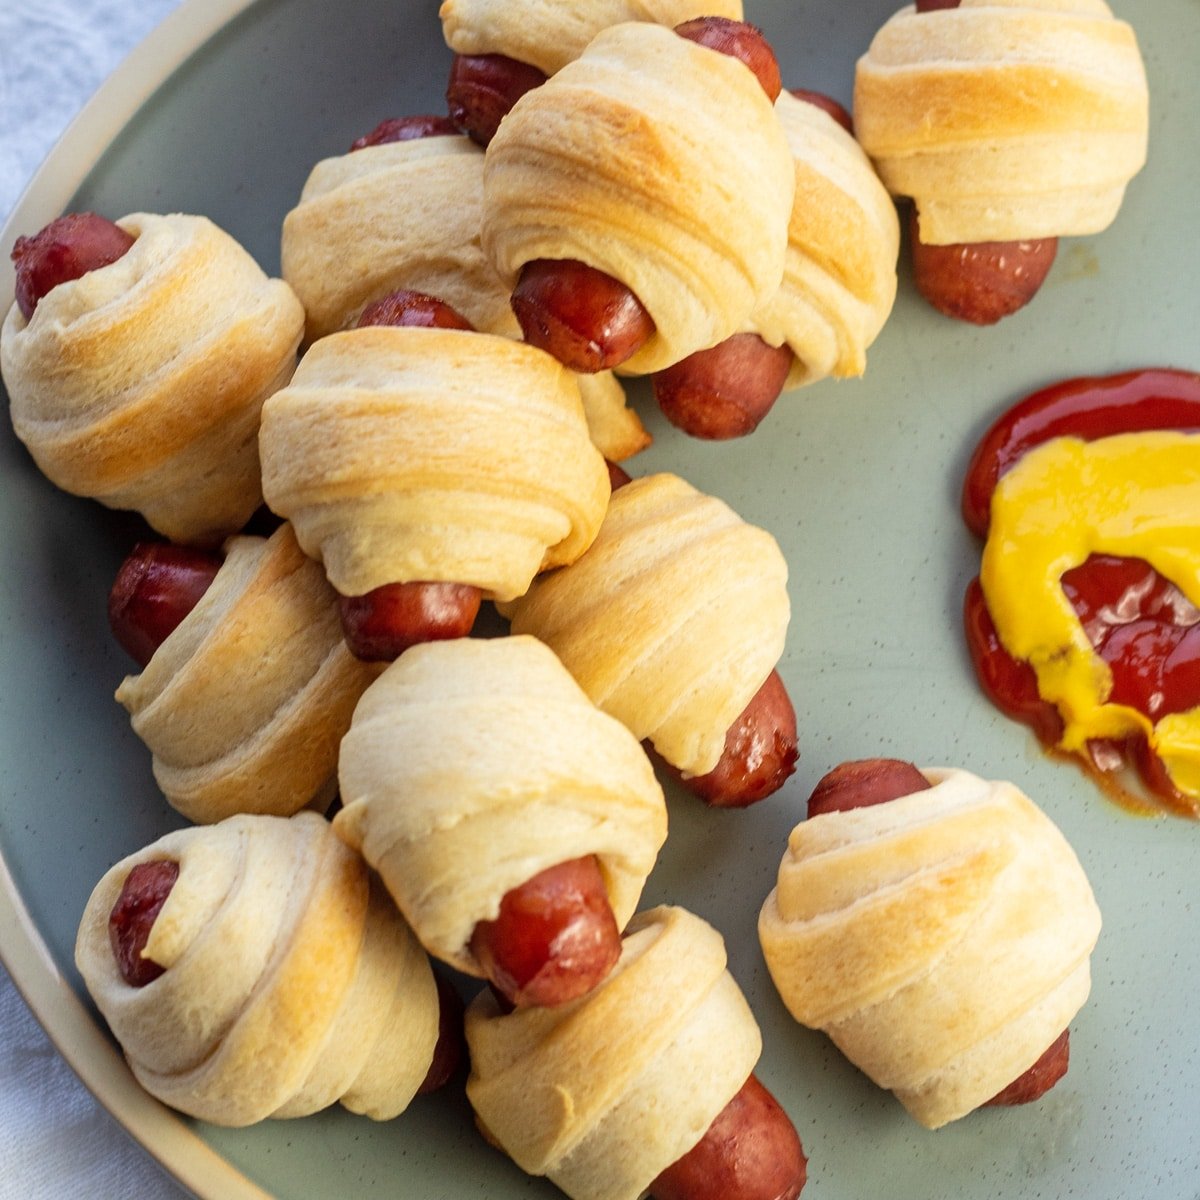 How to Reheat Pigs in a Blanket? 